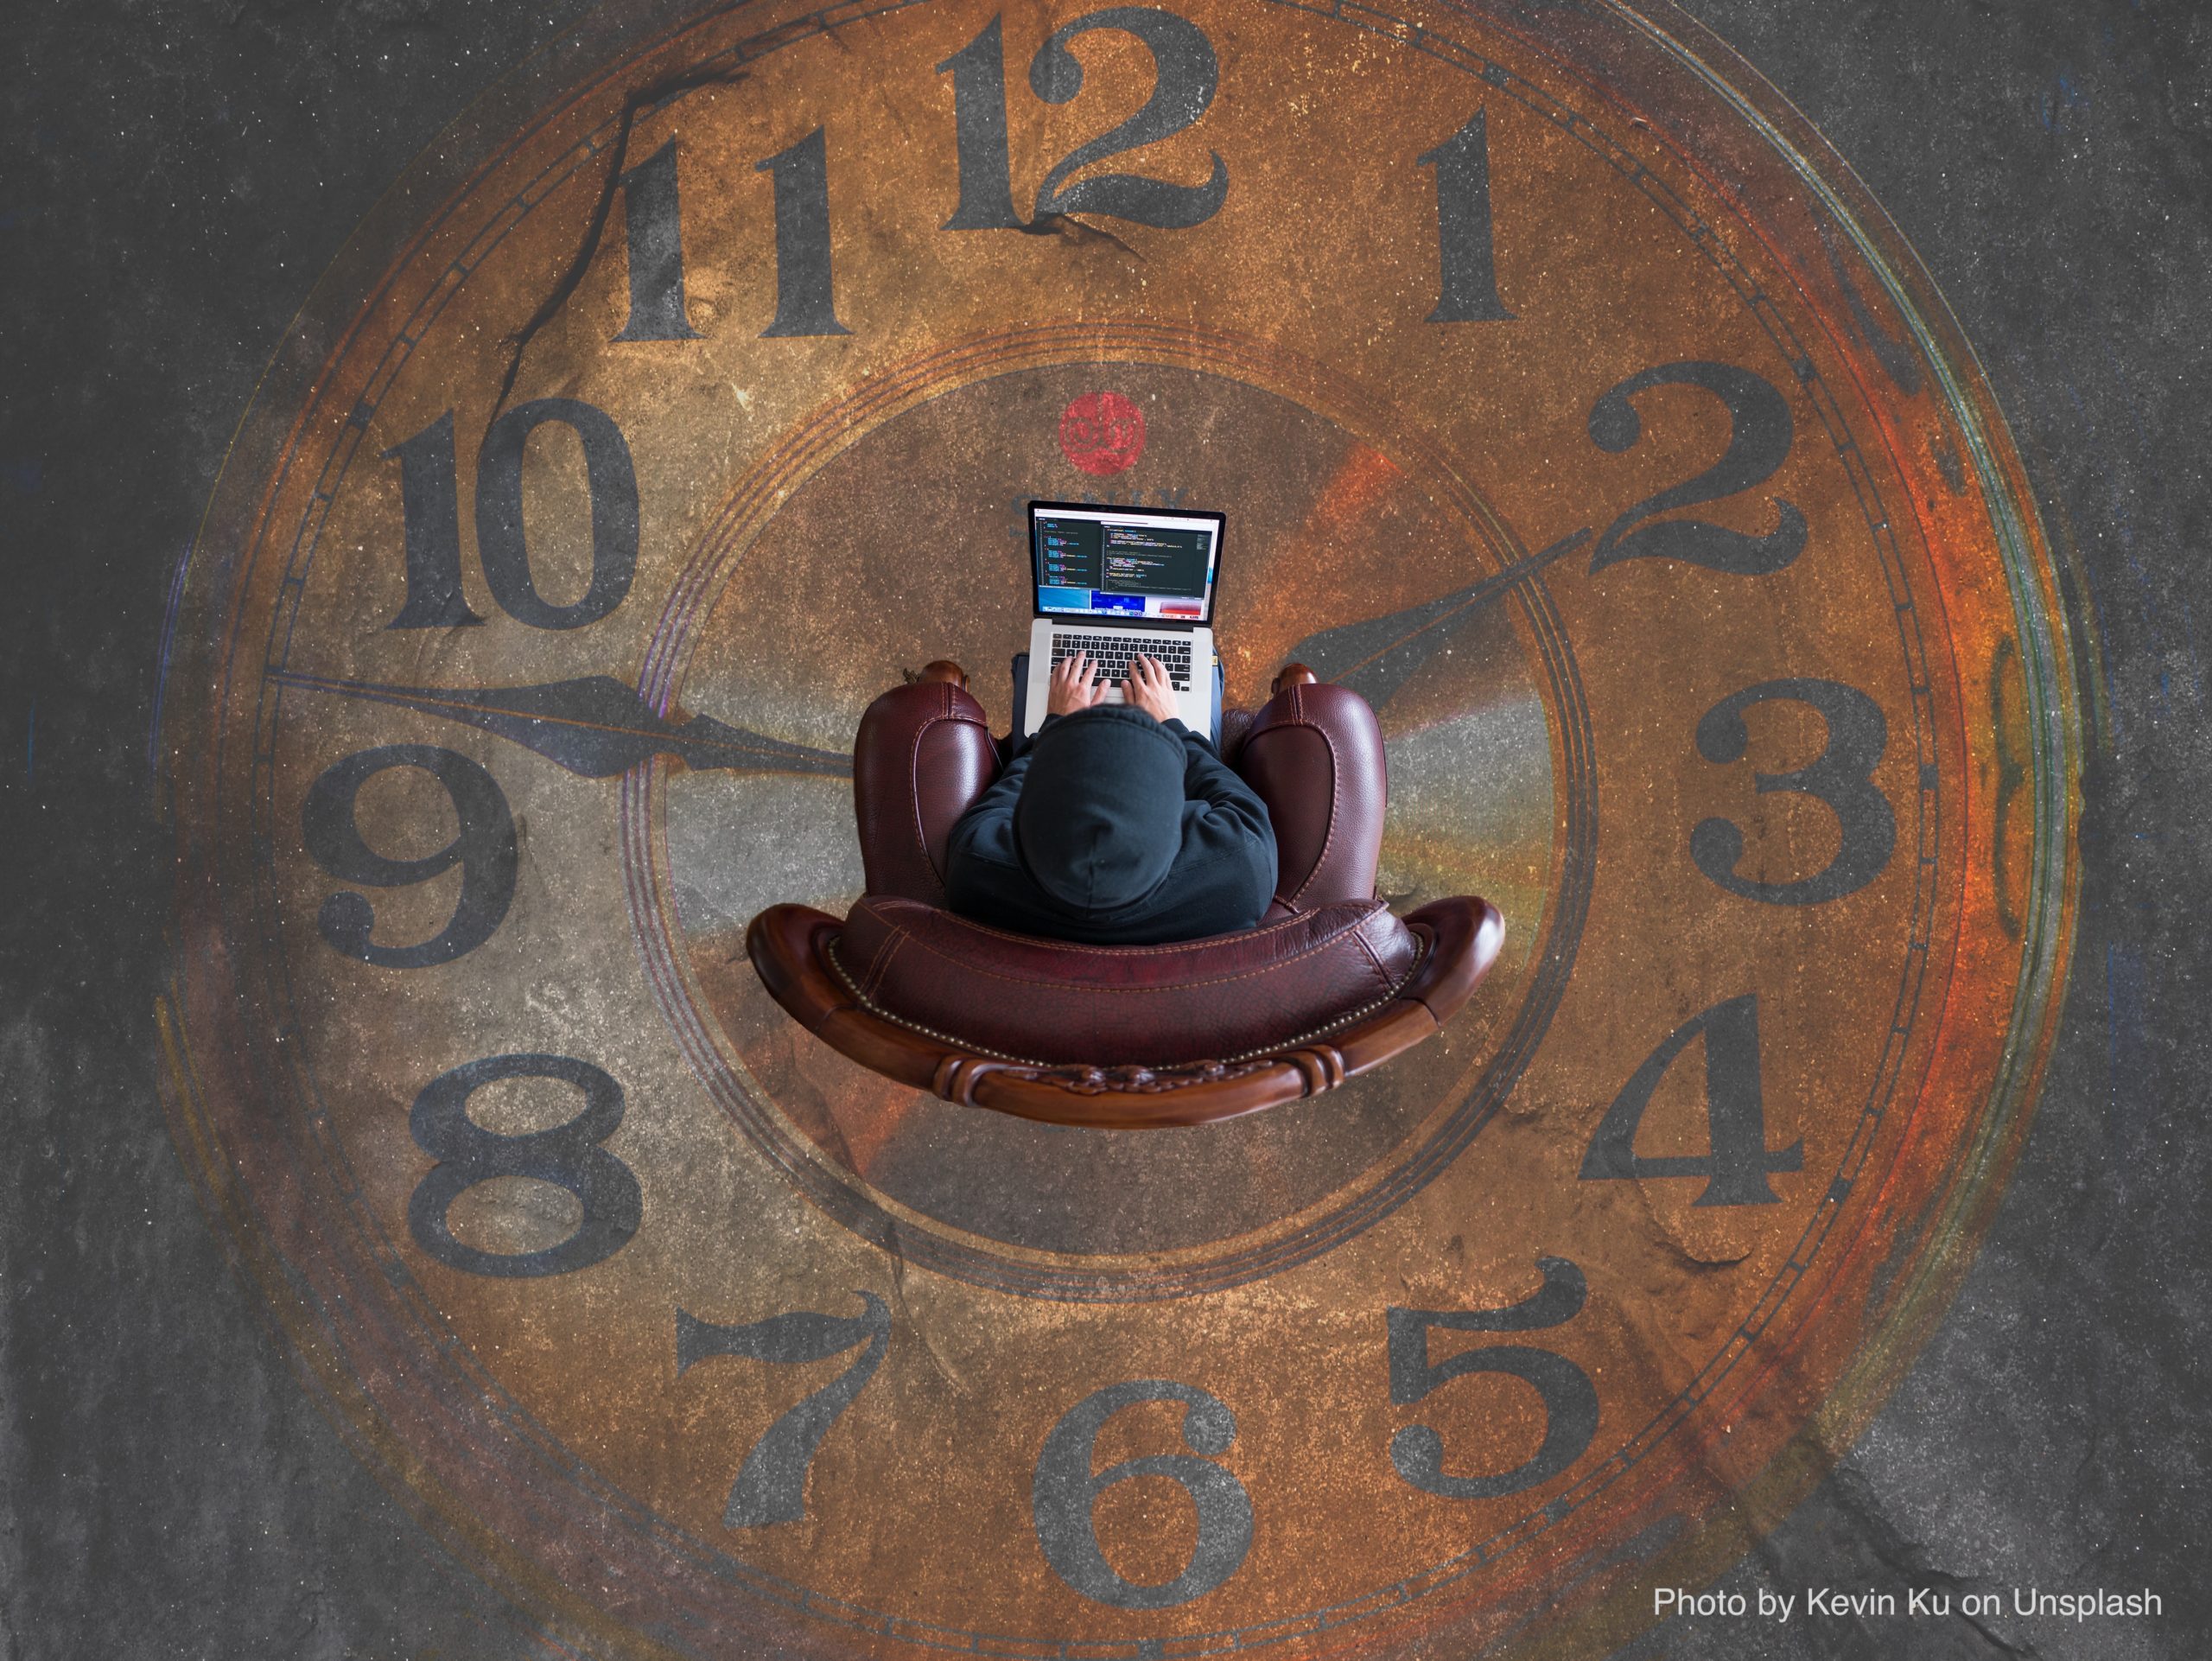 A person sits on a brown leather armchair working on a laptop which is perched on their knees. They are viewed from above and shown to be sitting in the middle of a rustic clock design that is displayed on the floor. The clock hands point to 10 past 9.